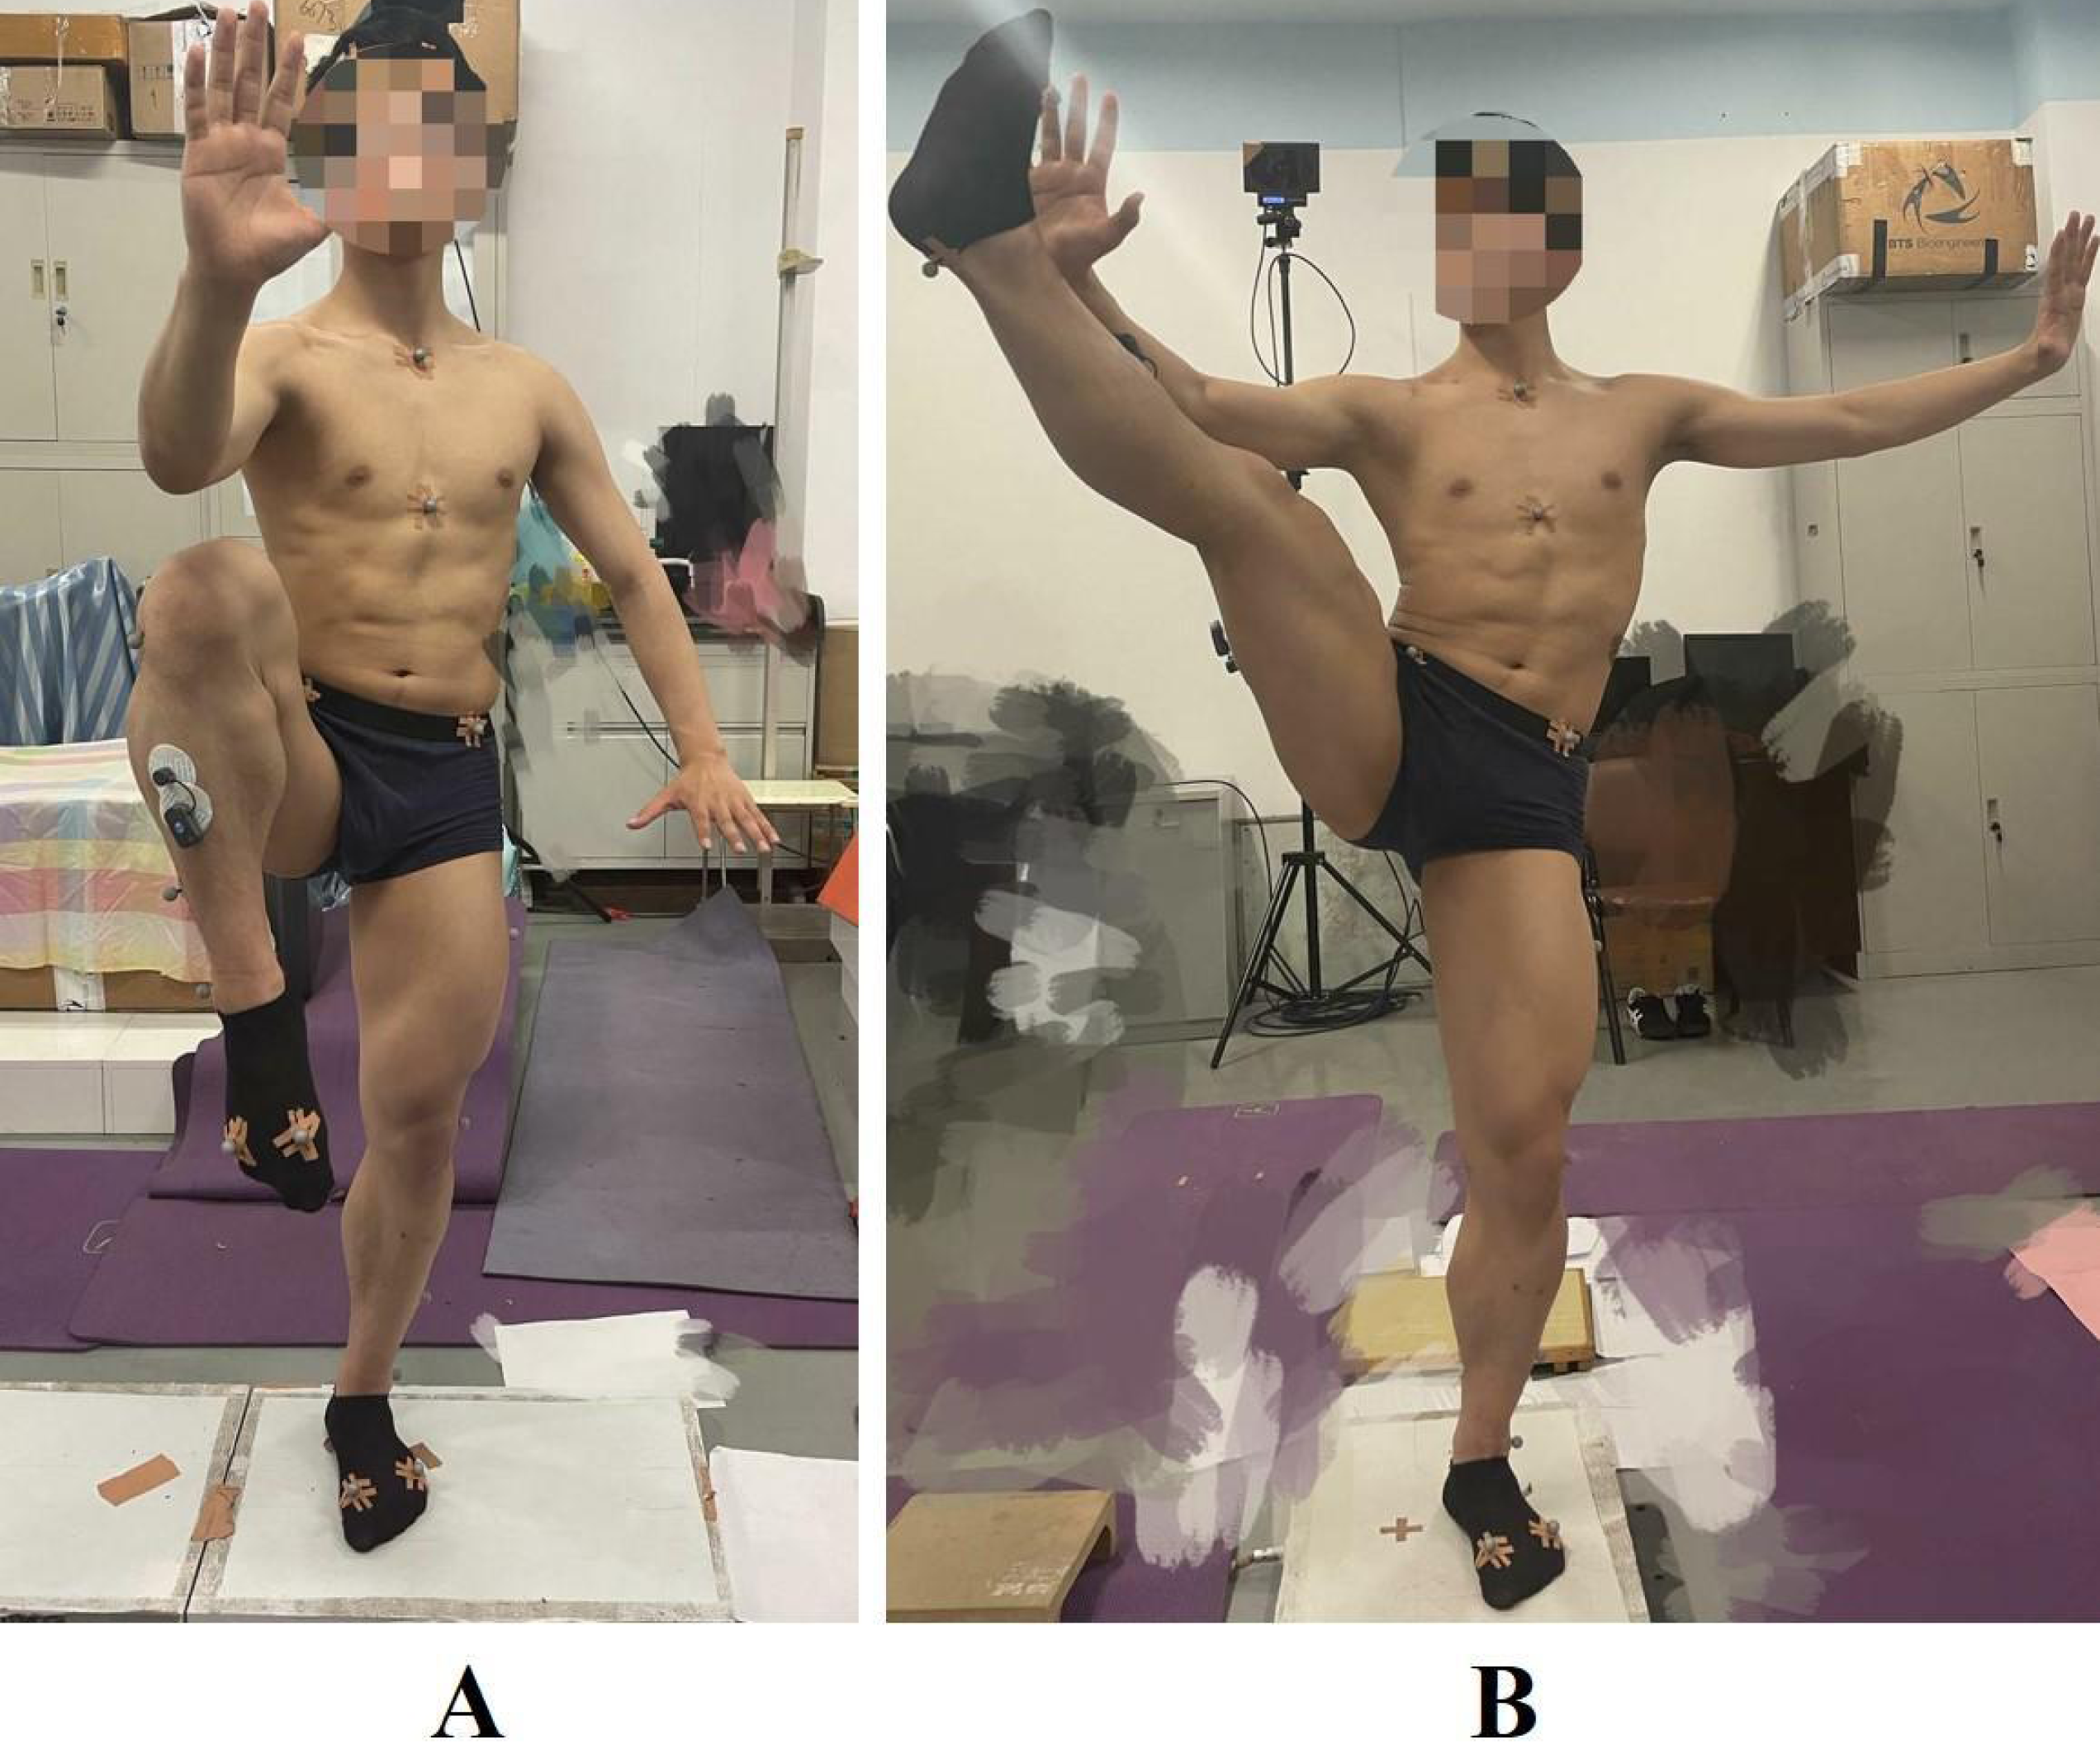 Analysis of technical characteristics of typical lower limb balance movements in Tai Chi a cross-sectional study based on AnyBody bone muscle modeling PeerJ